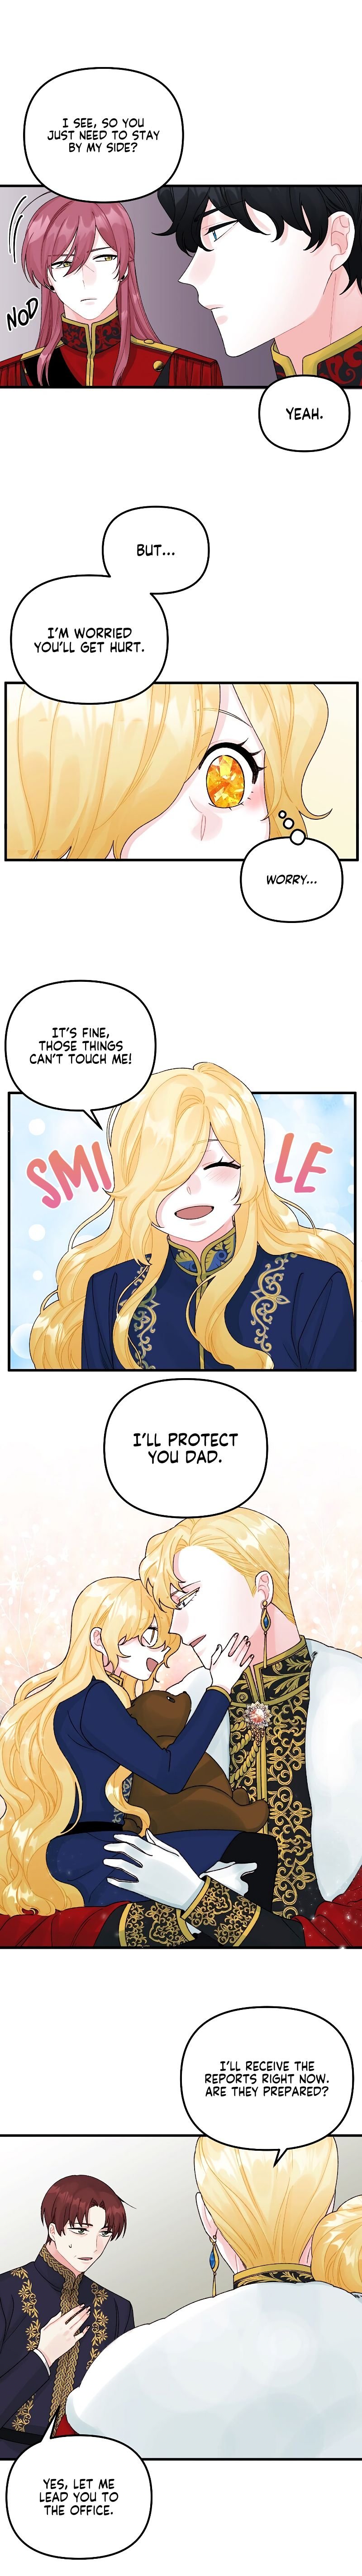 the-princess-in-the-dumpster-chap-37-6